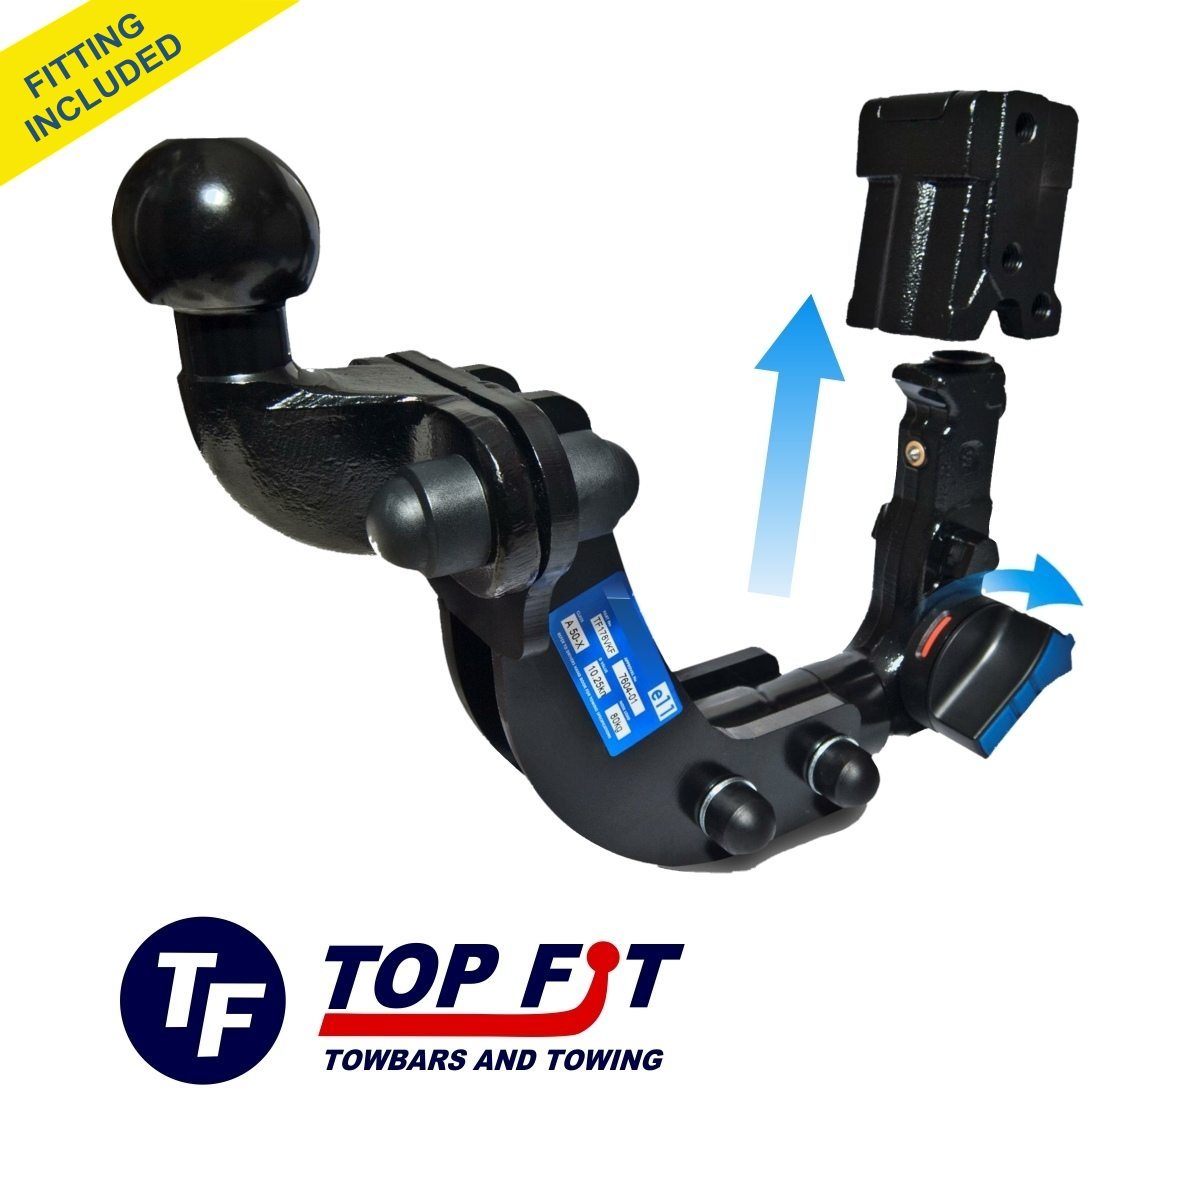 Flange Tow Bar Towbar for Peugeot 4007 SUV 2007-2013